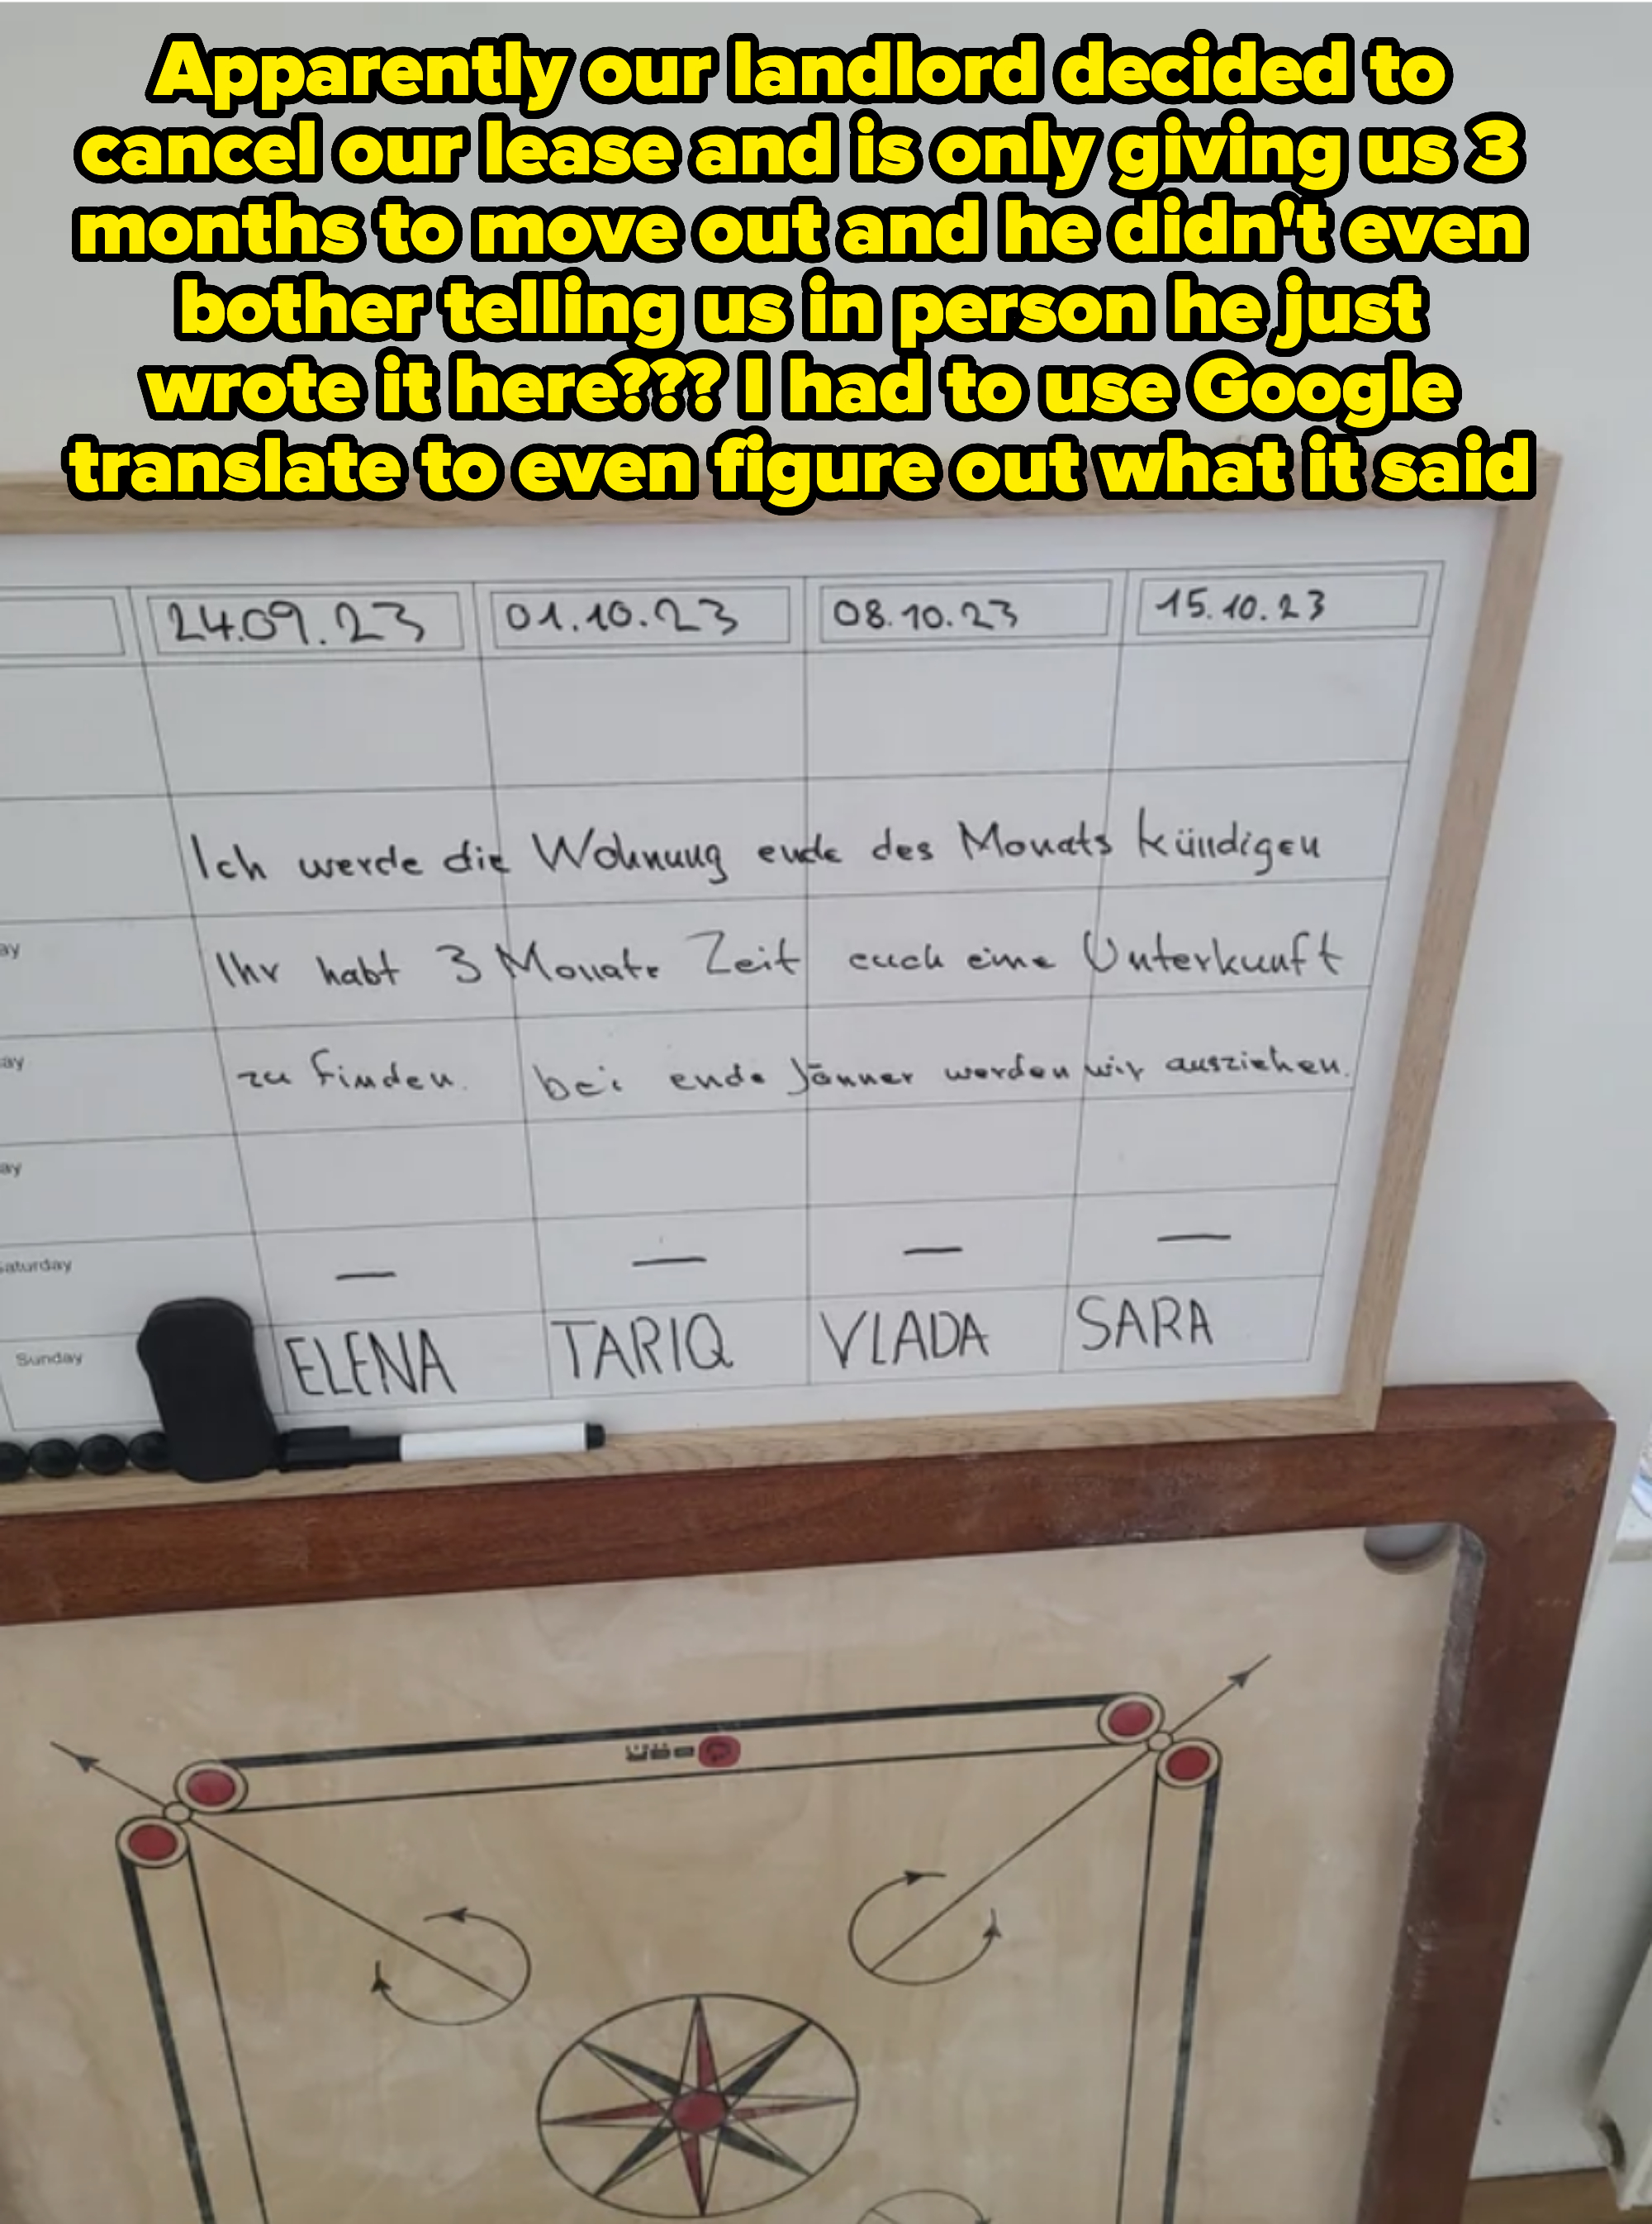 Whiteboard with handwritten notice of tenancy termination and names Elena, Ylada, and Sara below. A game board is seen underneath